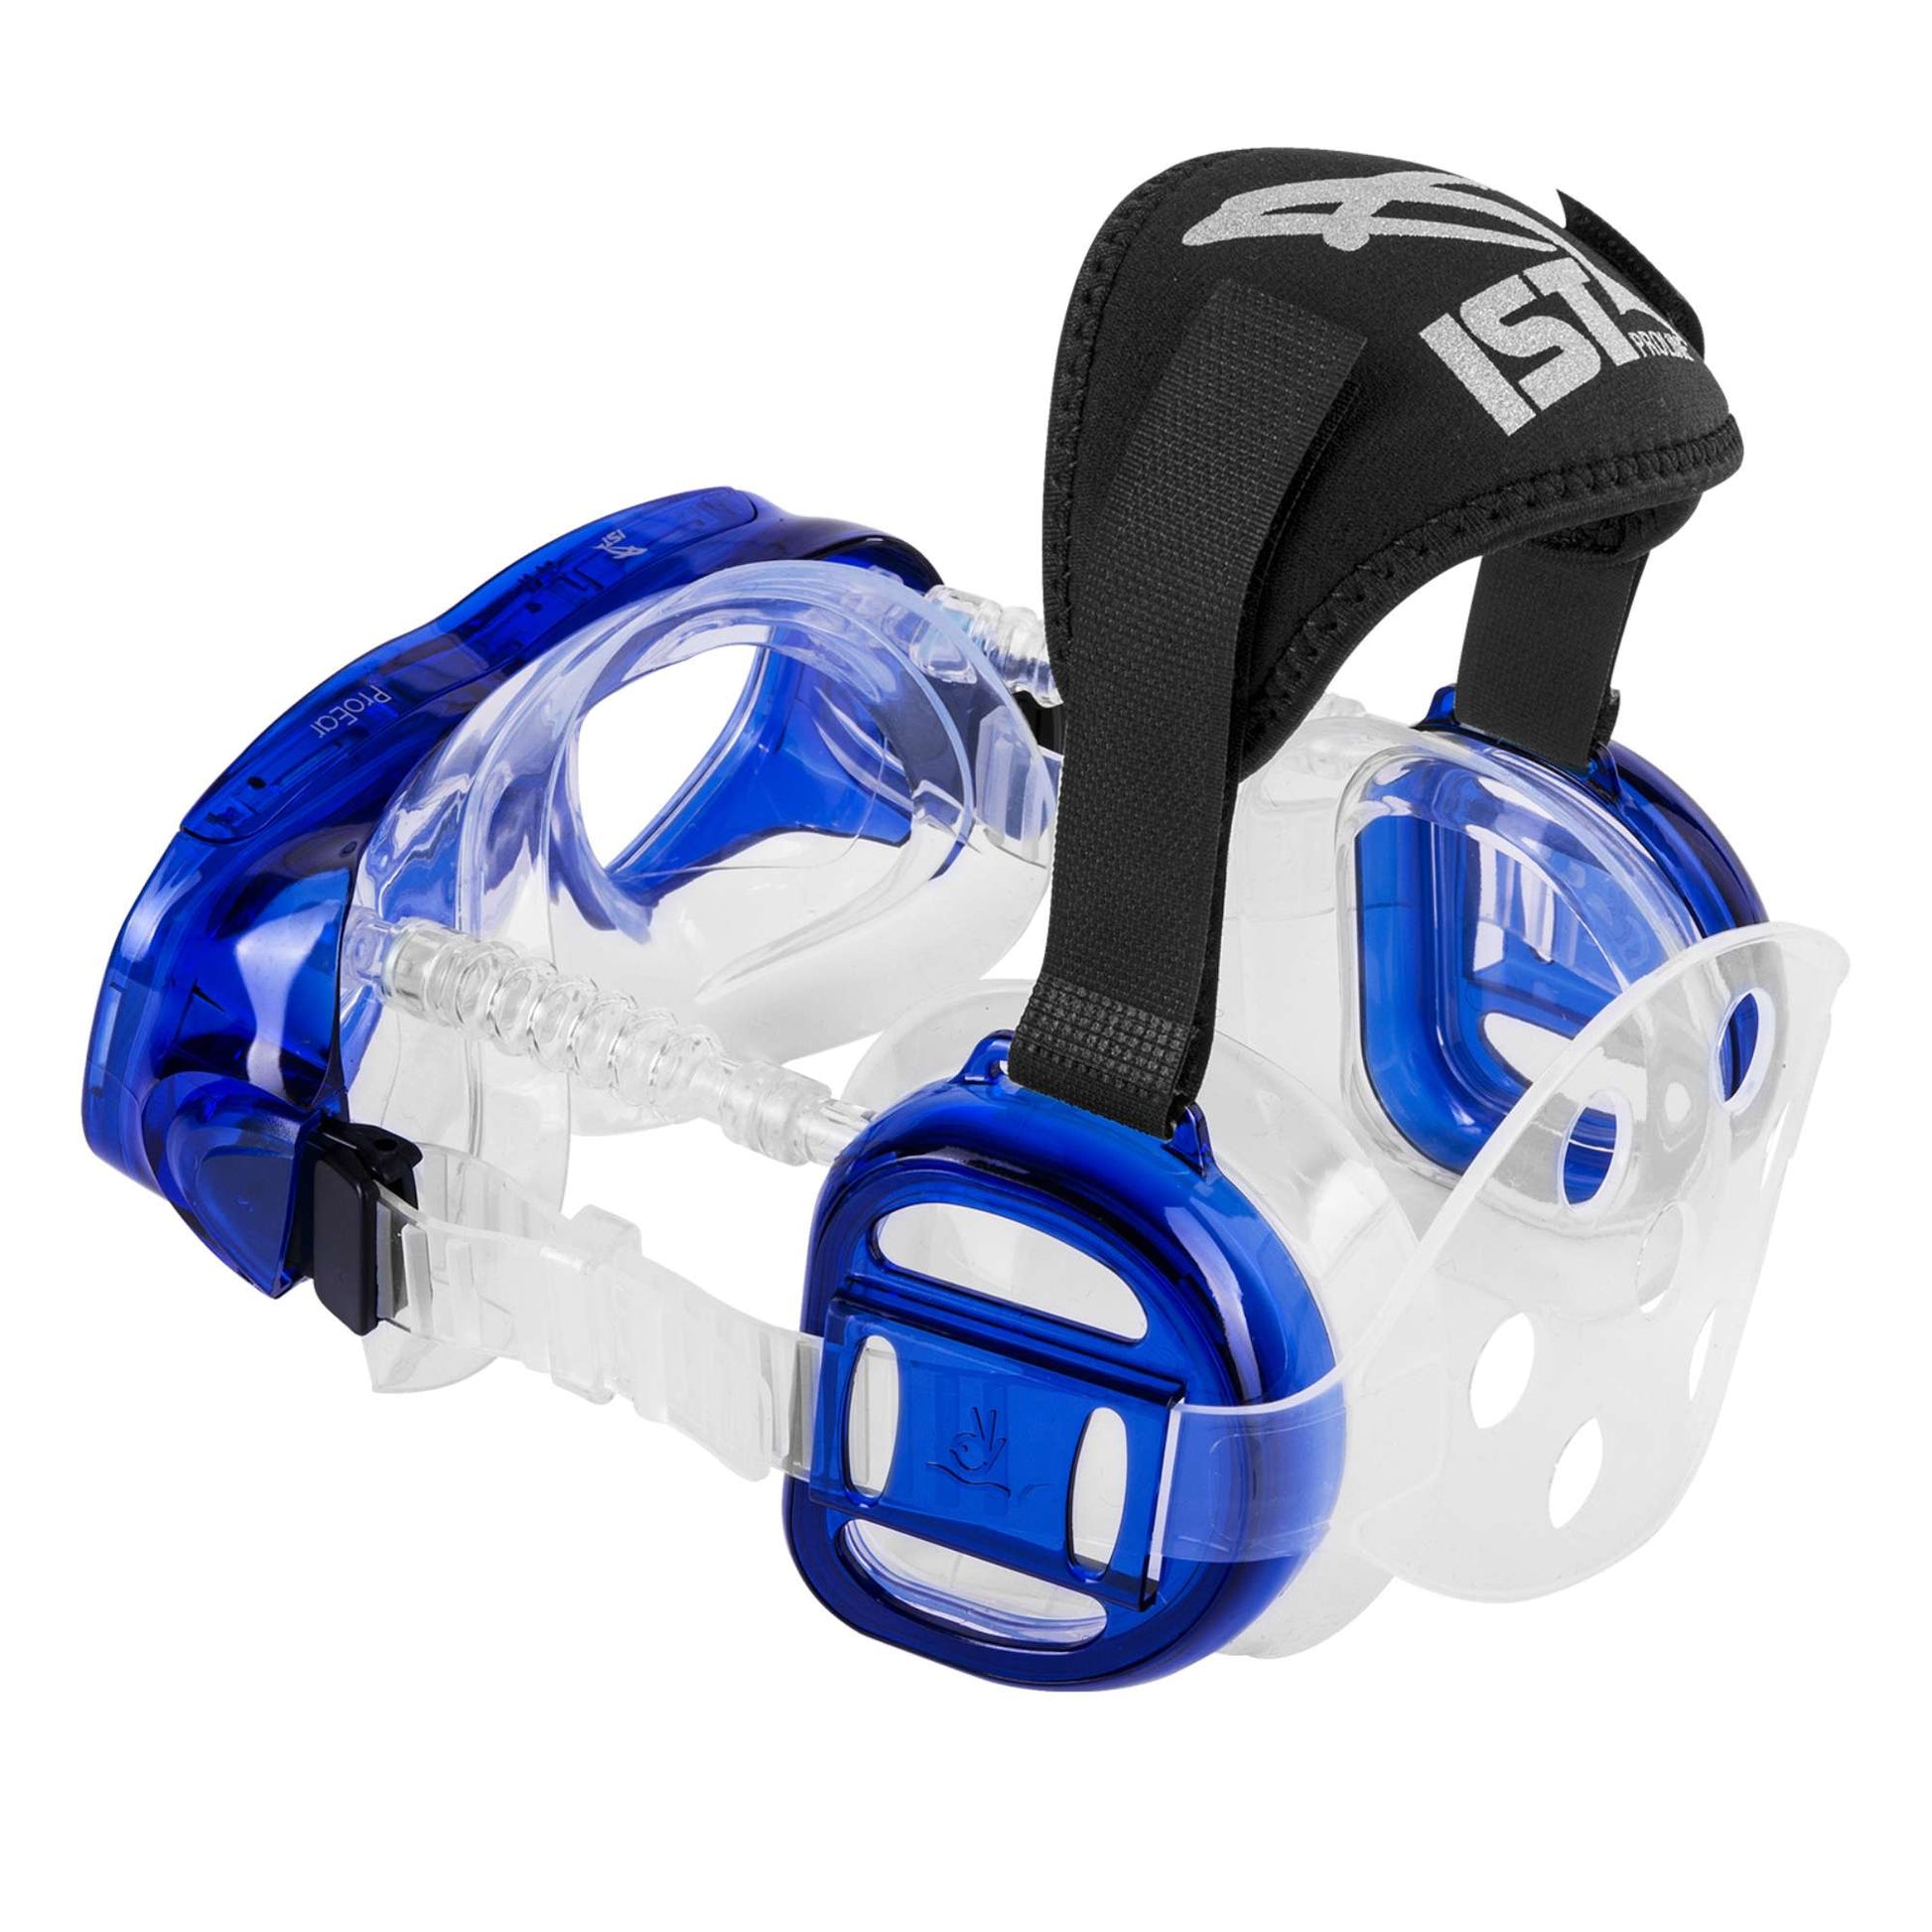 IST Pro Ear Protector Mask